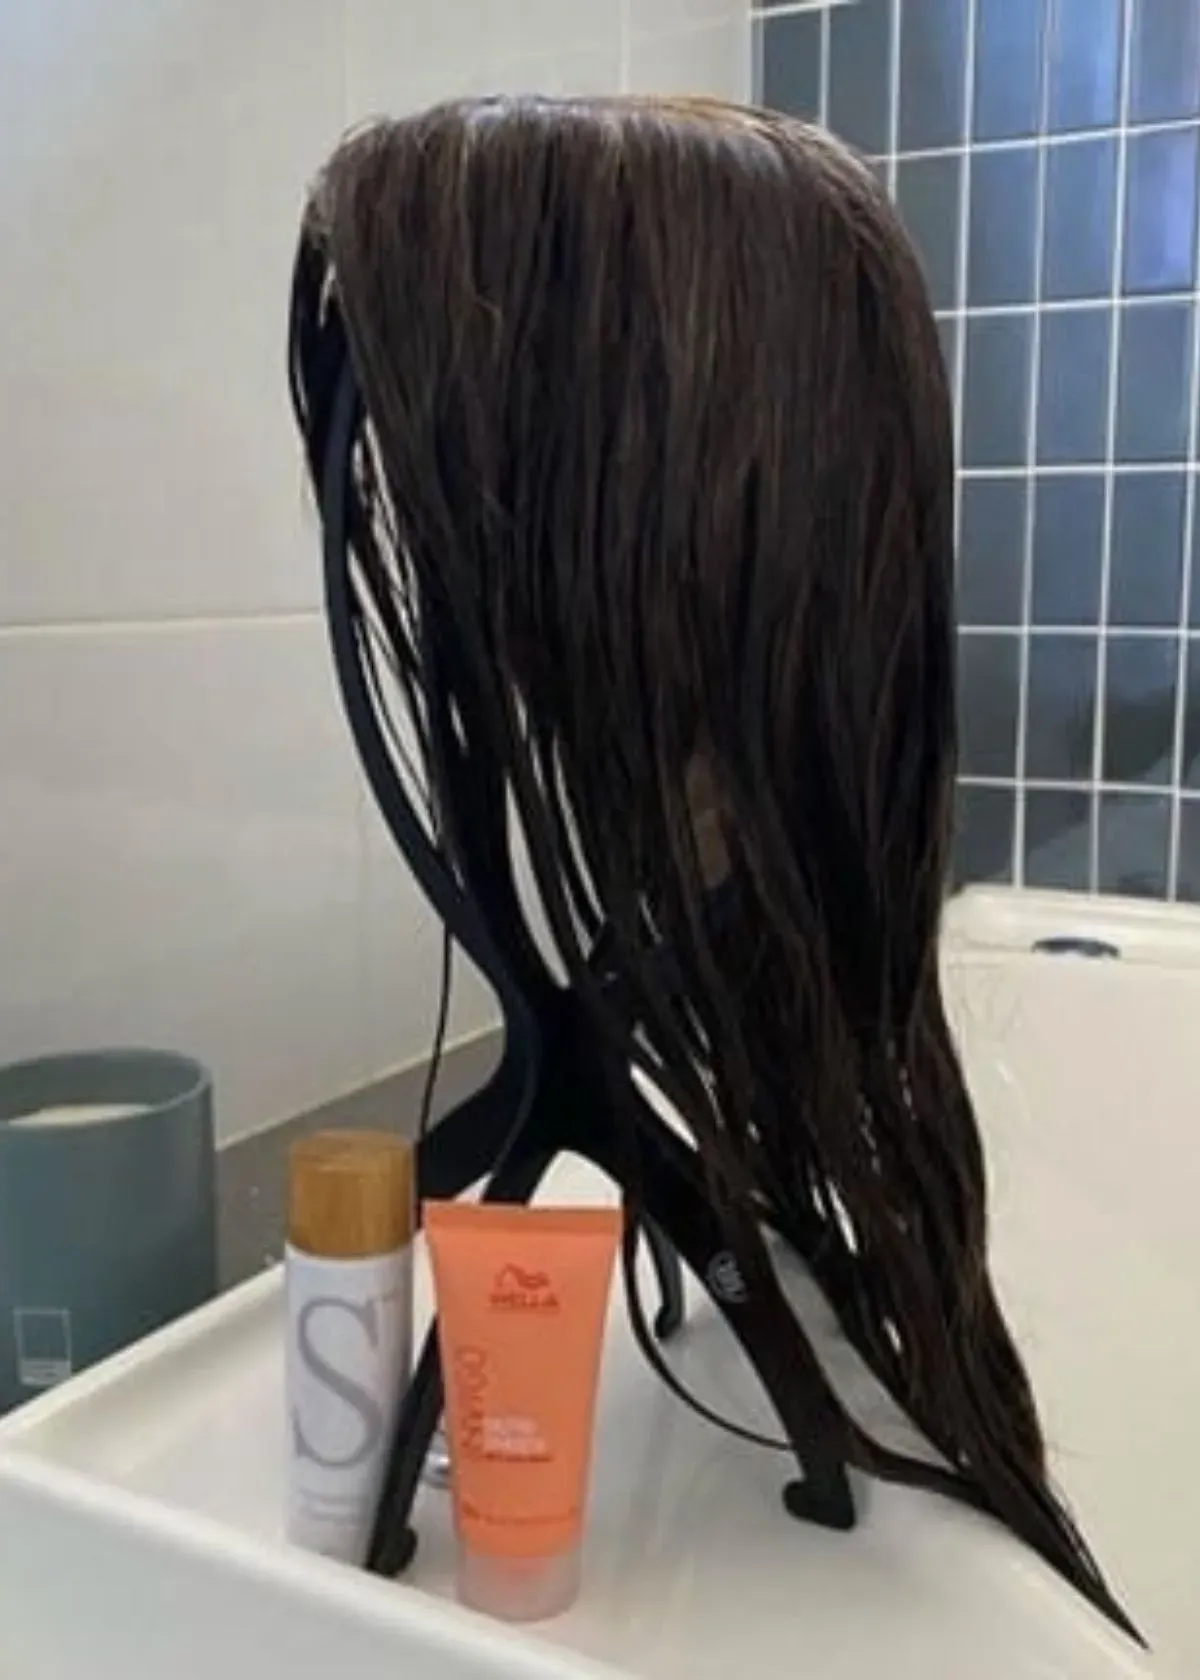 How Often Should Human Hair Wigs Be Cleaned?